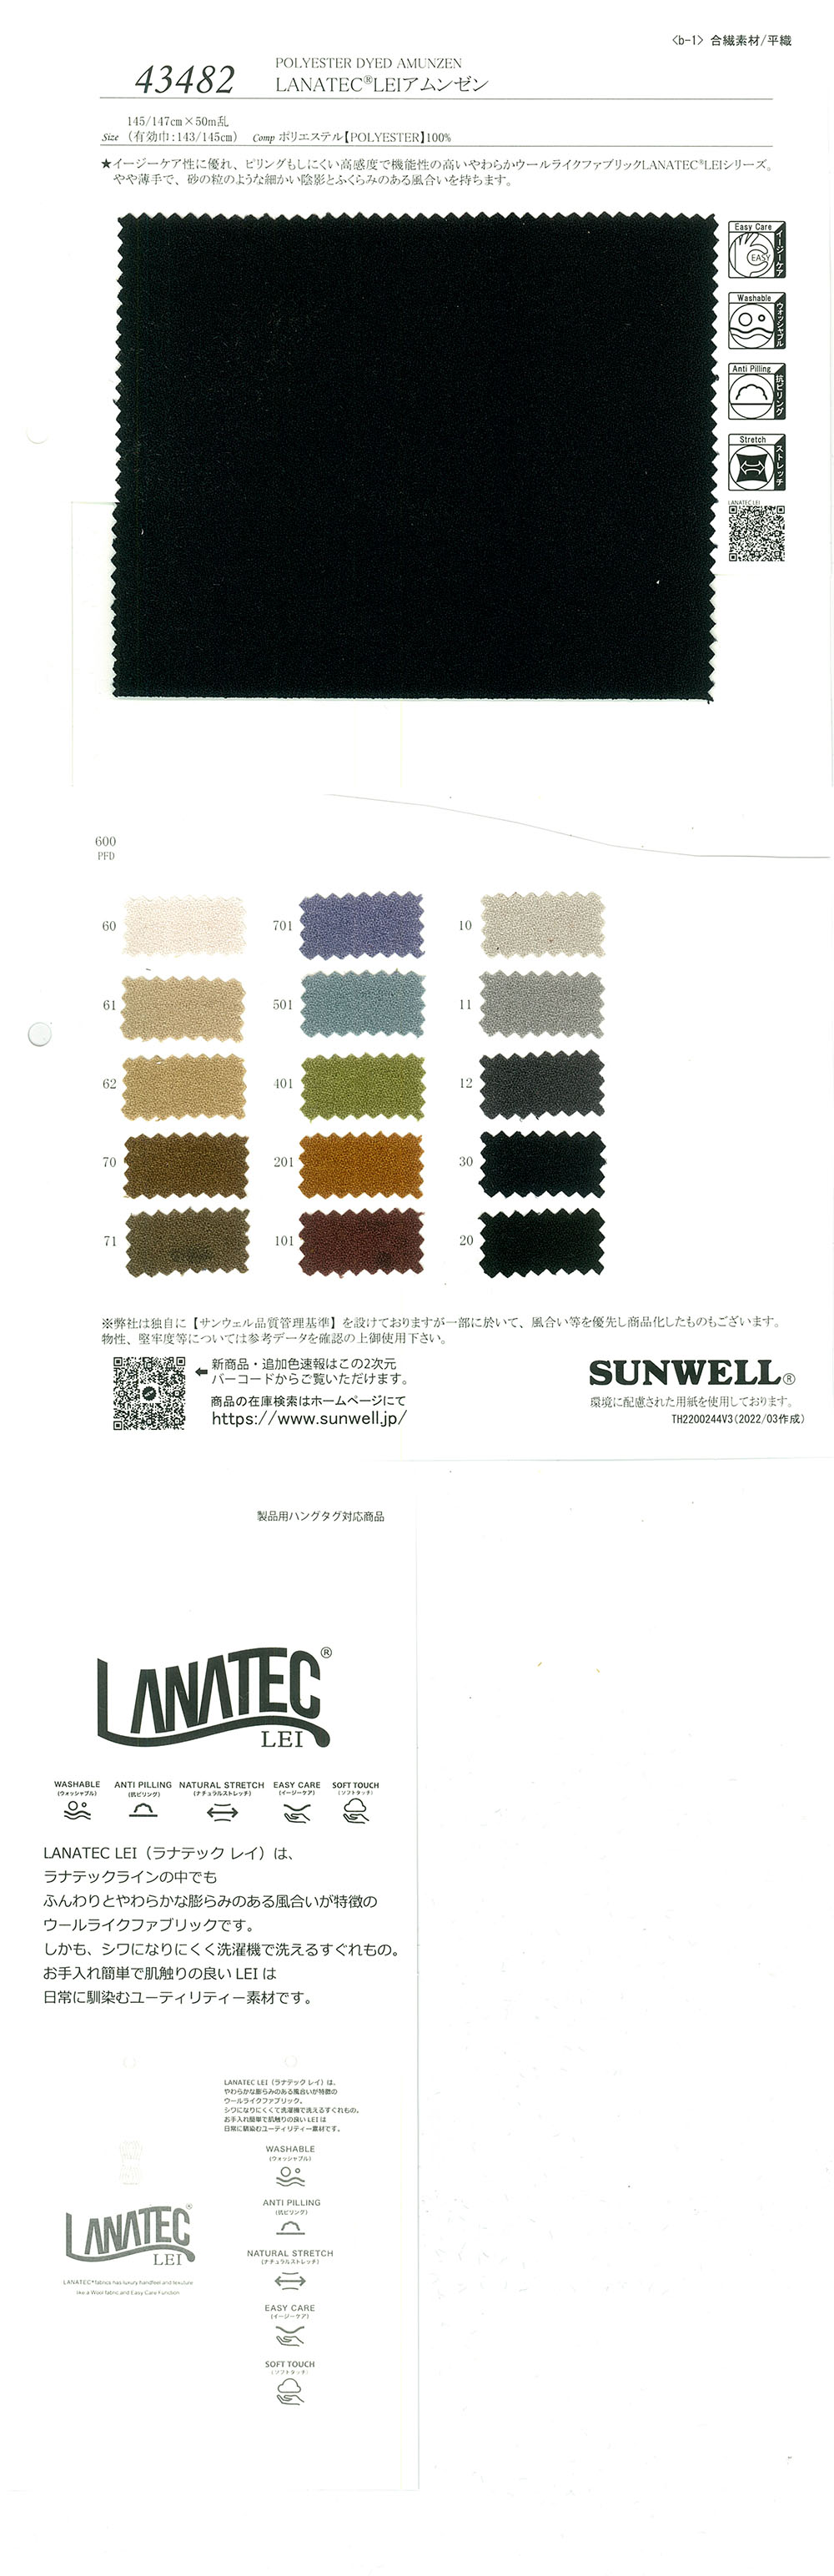 43482 LANATEC(R) LEI Roughness Surface[Textile / Fabric] SUNWELL